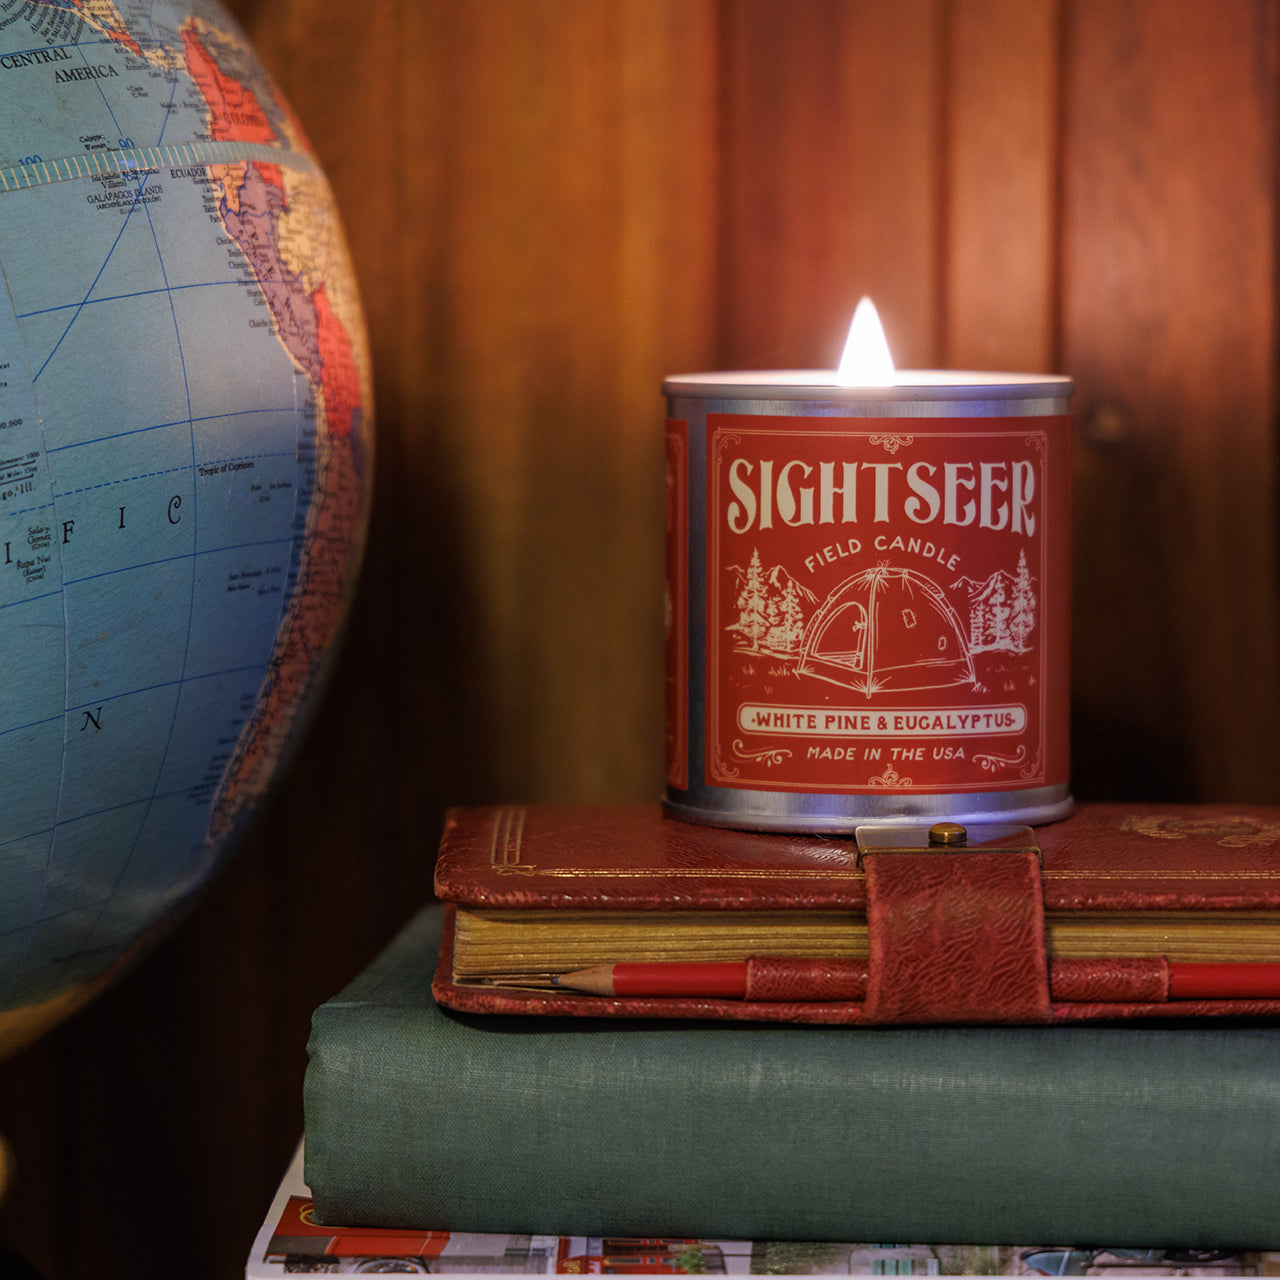 Sightseer Field Candle